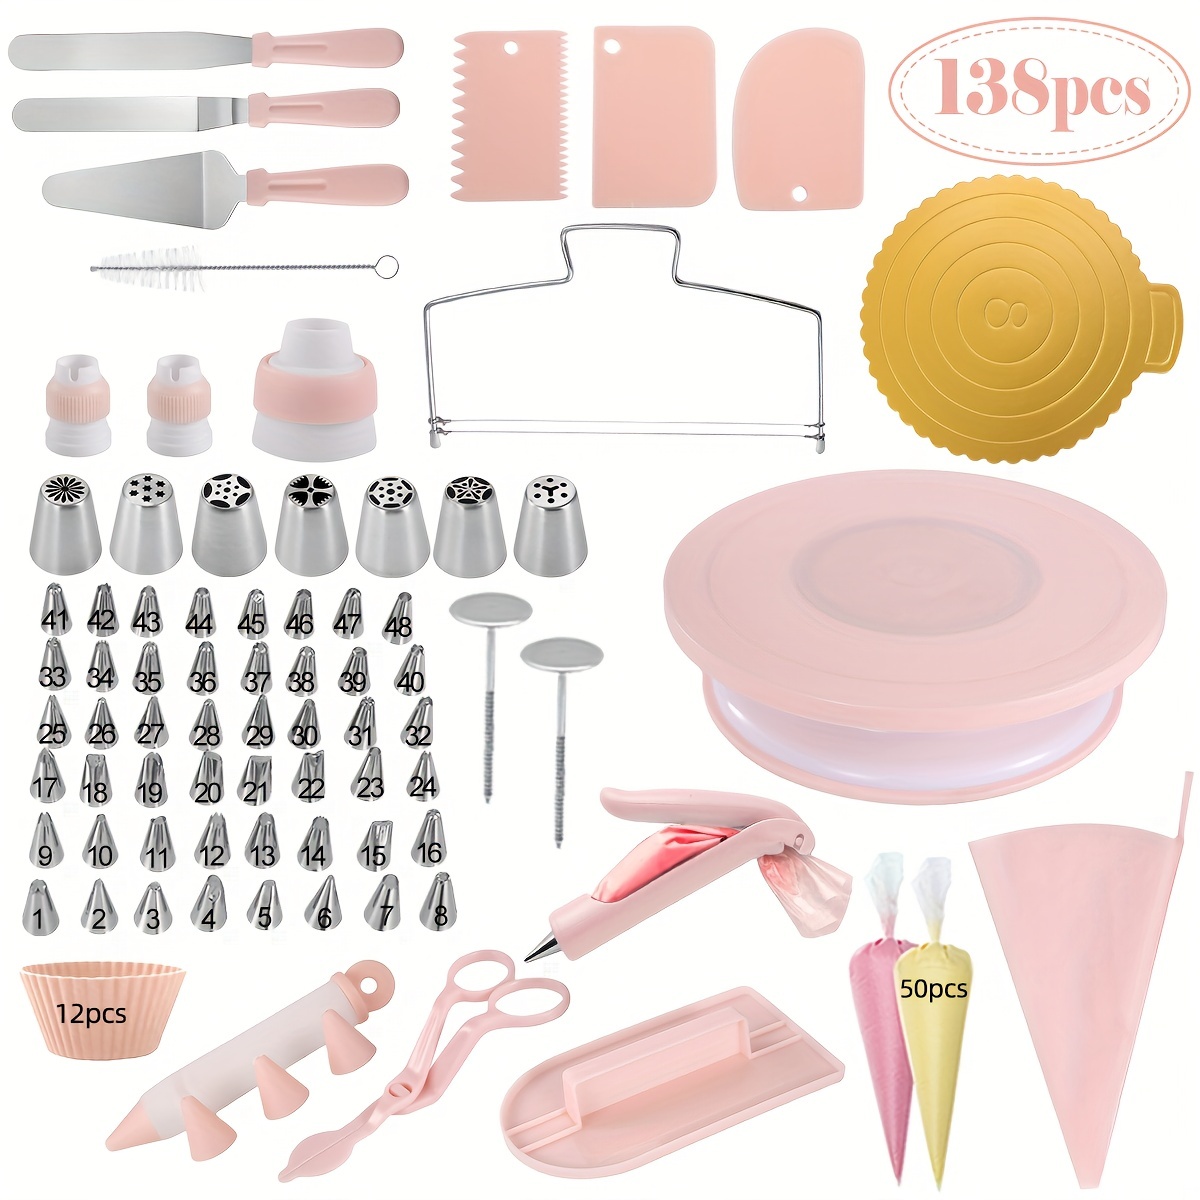 Cake Decorating Kit,132Pcs Cake Decorating Tools with Cake Turntable Stand  Icing Piping Bags and Tips Set Baking Supplies Set for Beginner and Cake-Lover  